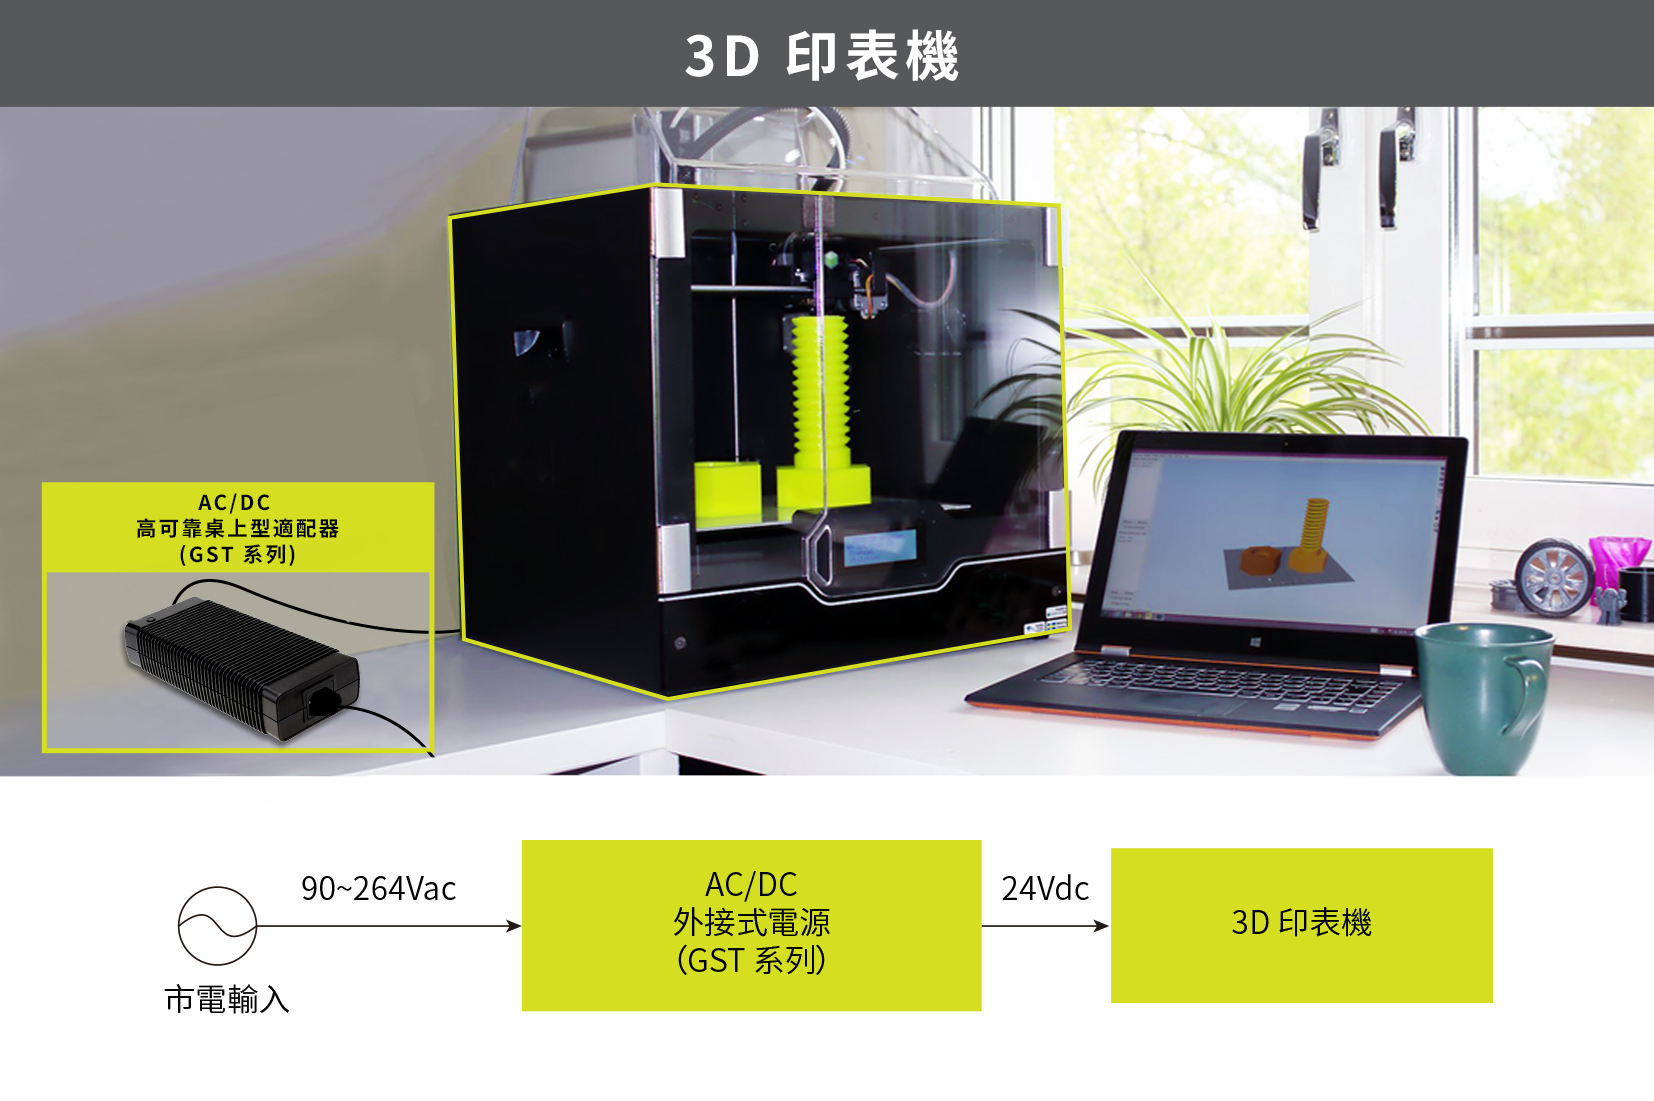 MEAN WELL GST series, industrial and green adaptor, 3D printer